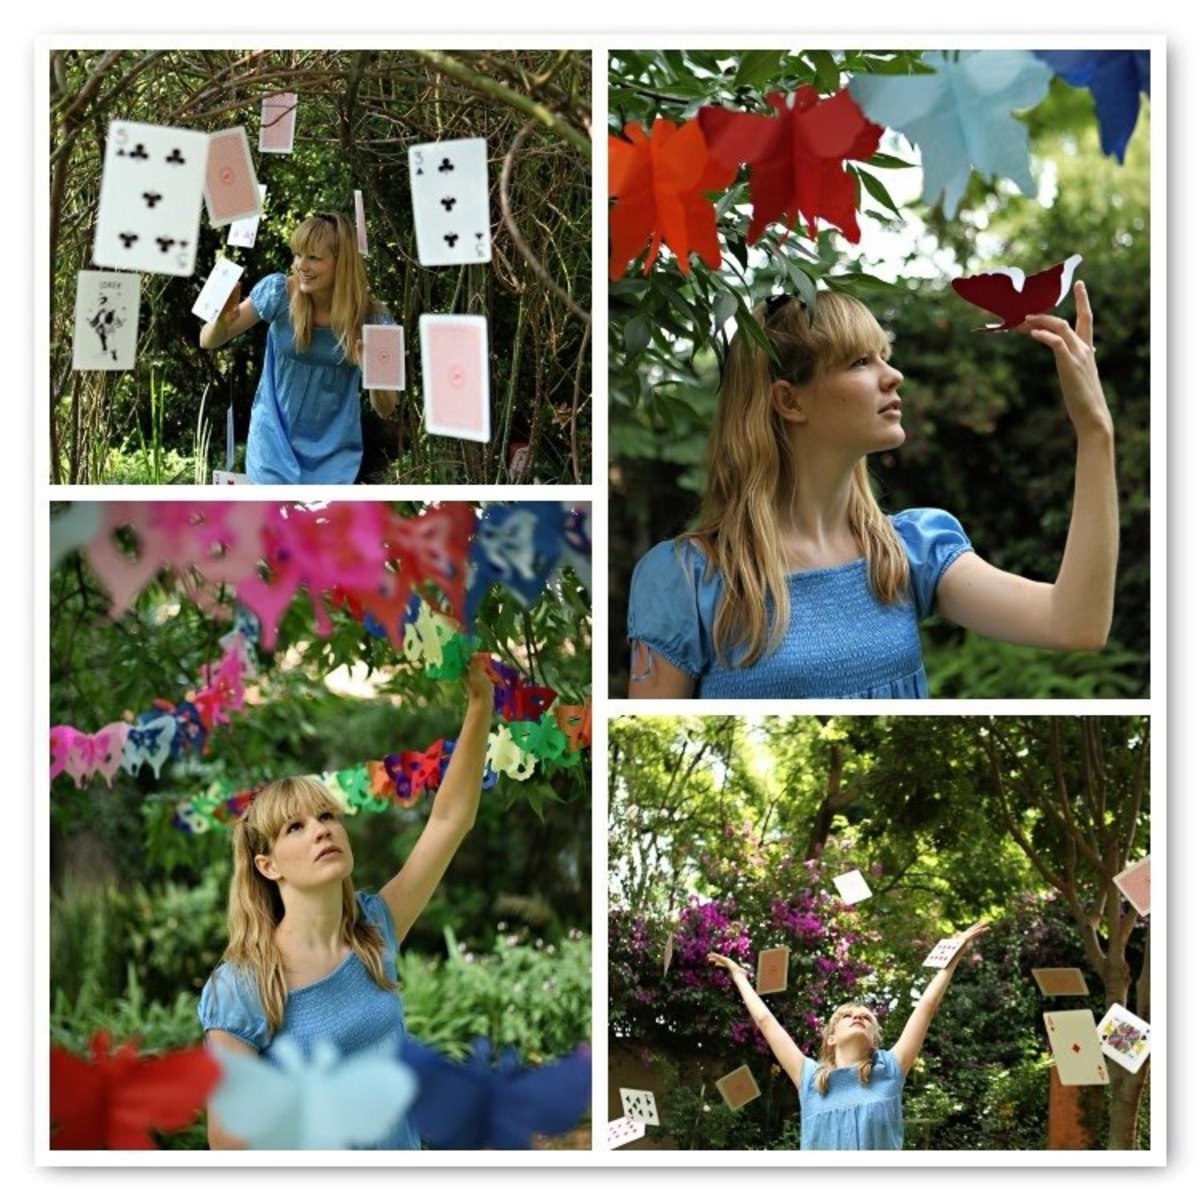 Use playing cards to decorate for an Alice in Wonderland party.